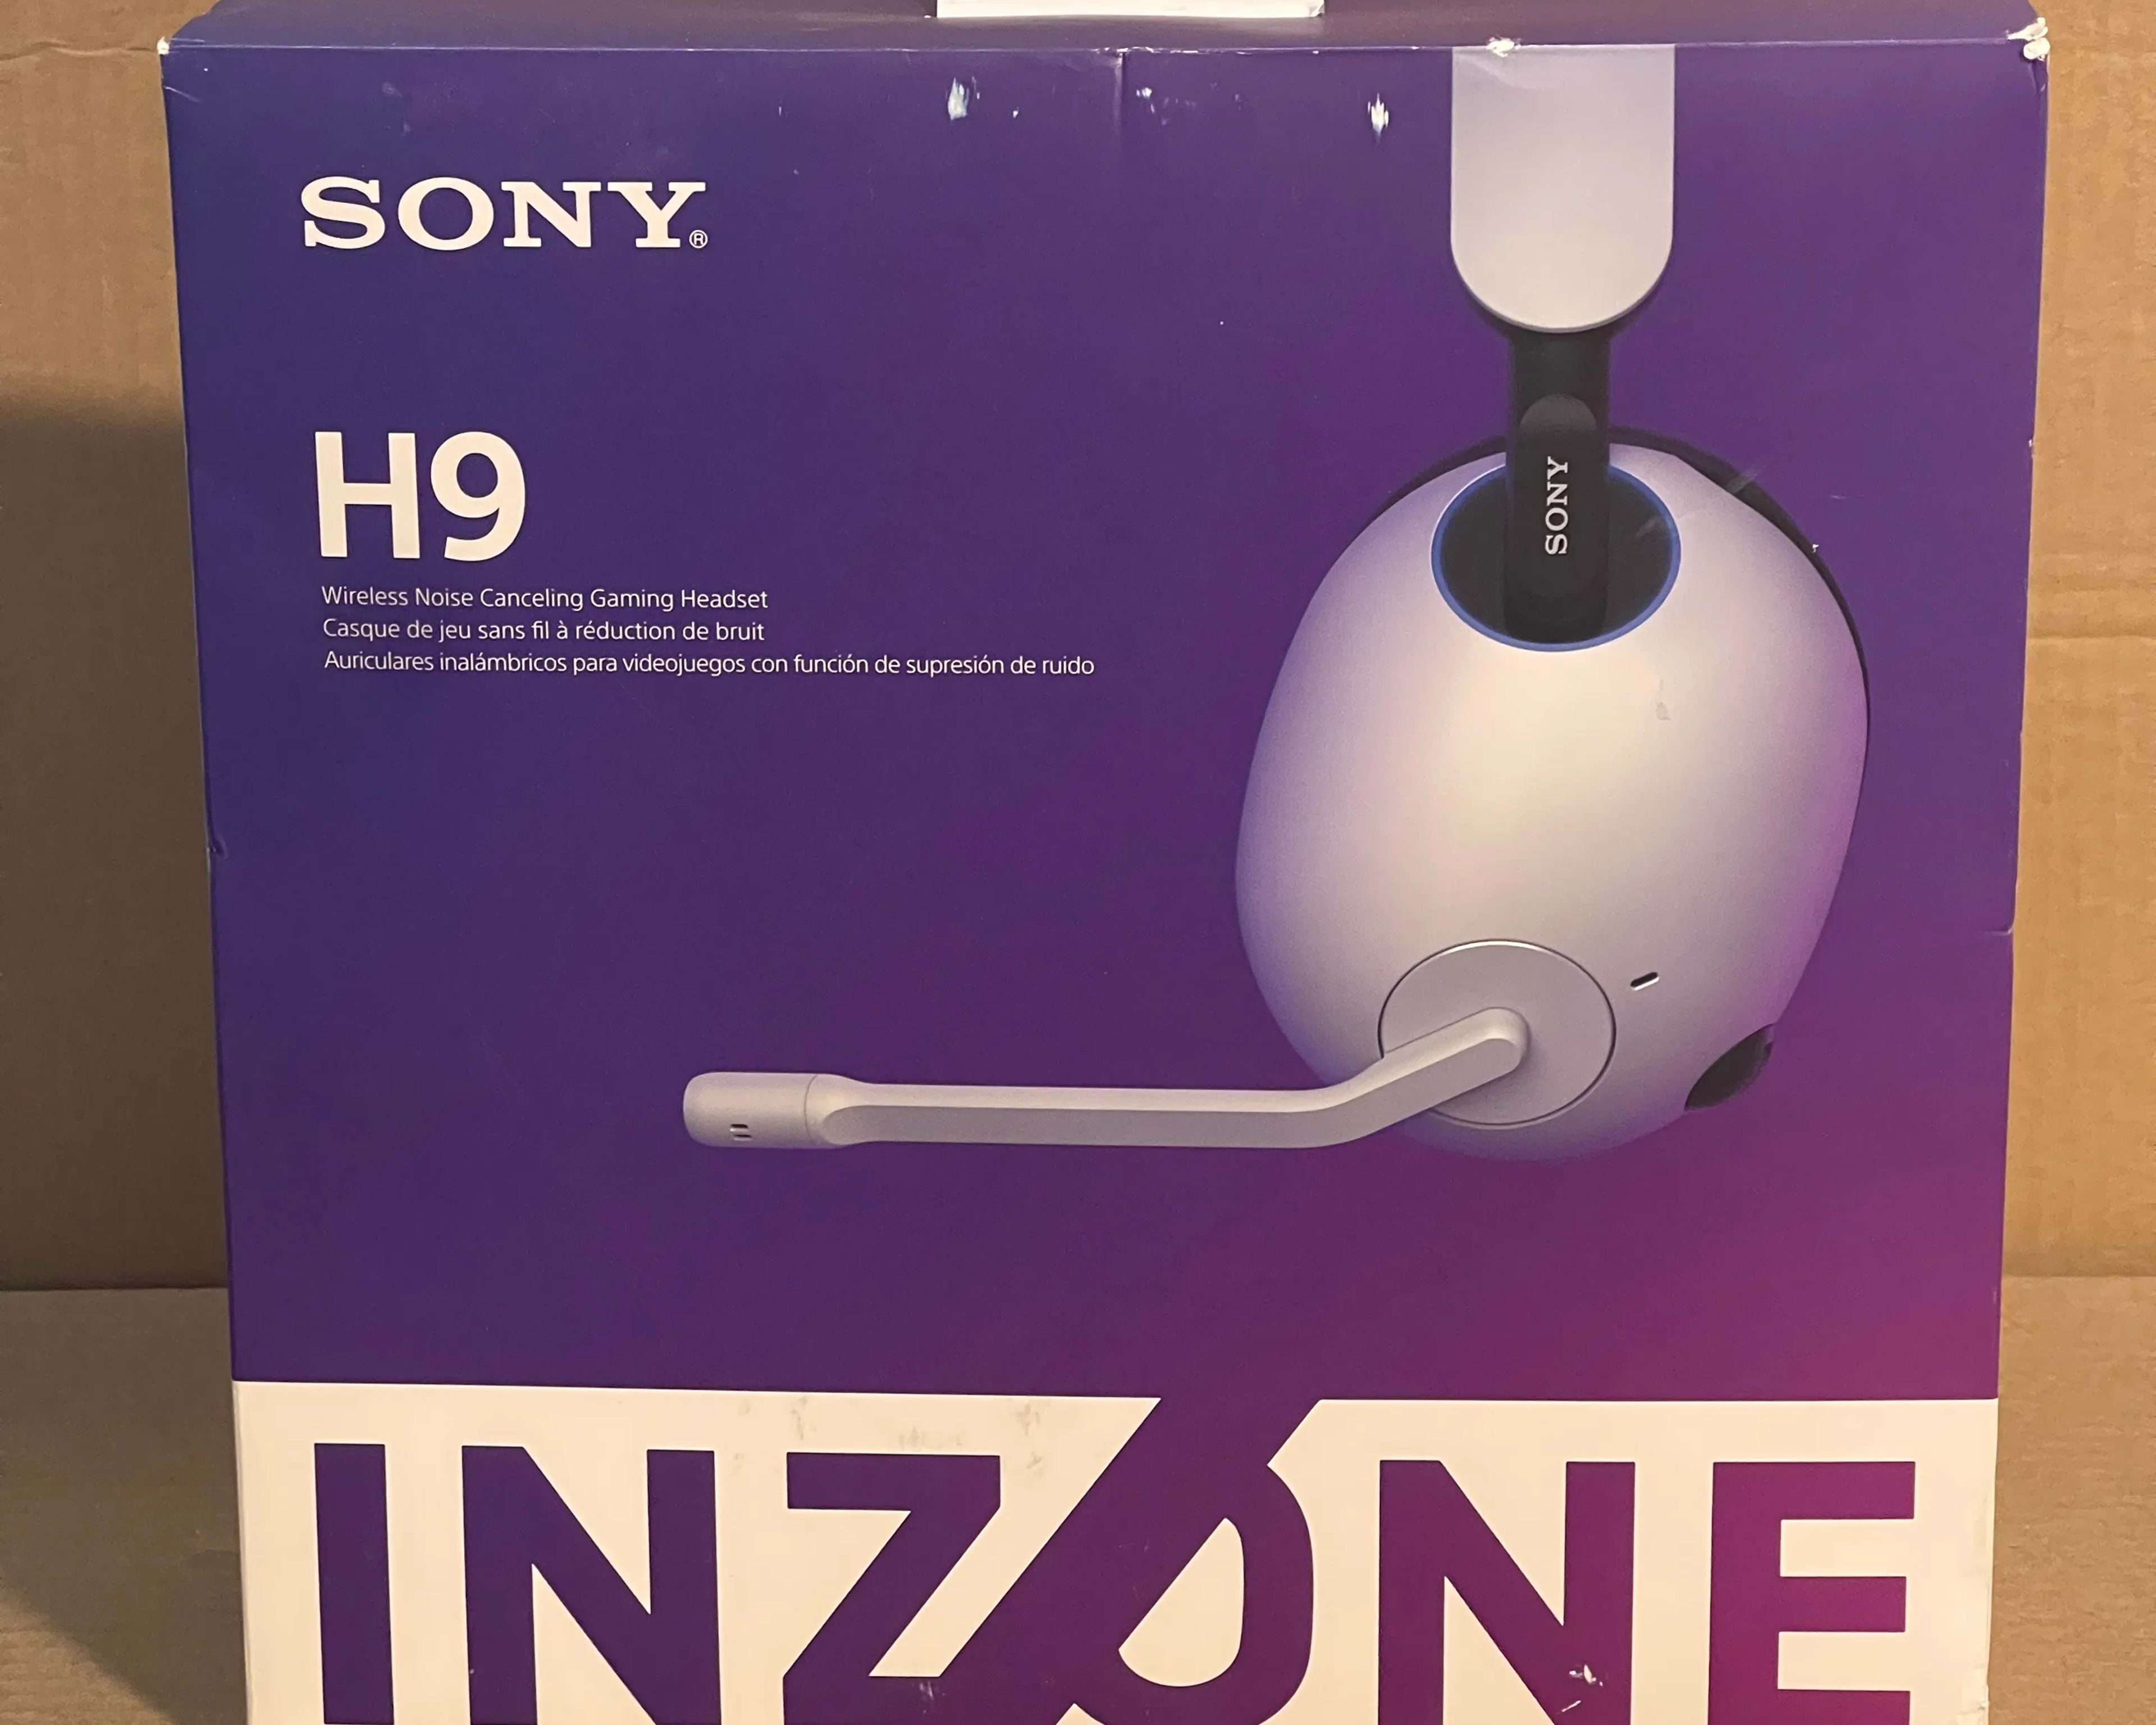 Used, Sony INZONE H9 Wireless Noise Cancelling Gaming Headset, Complete